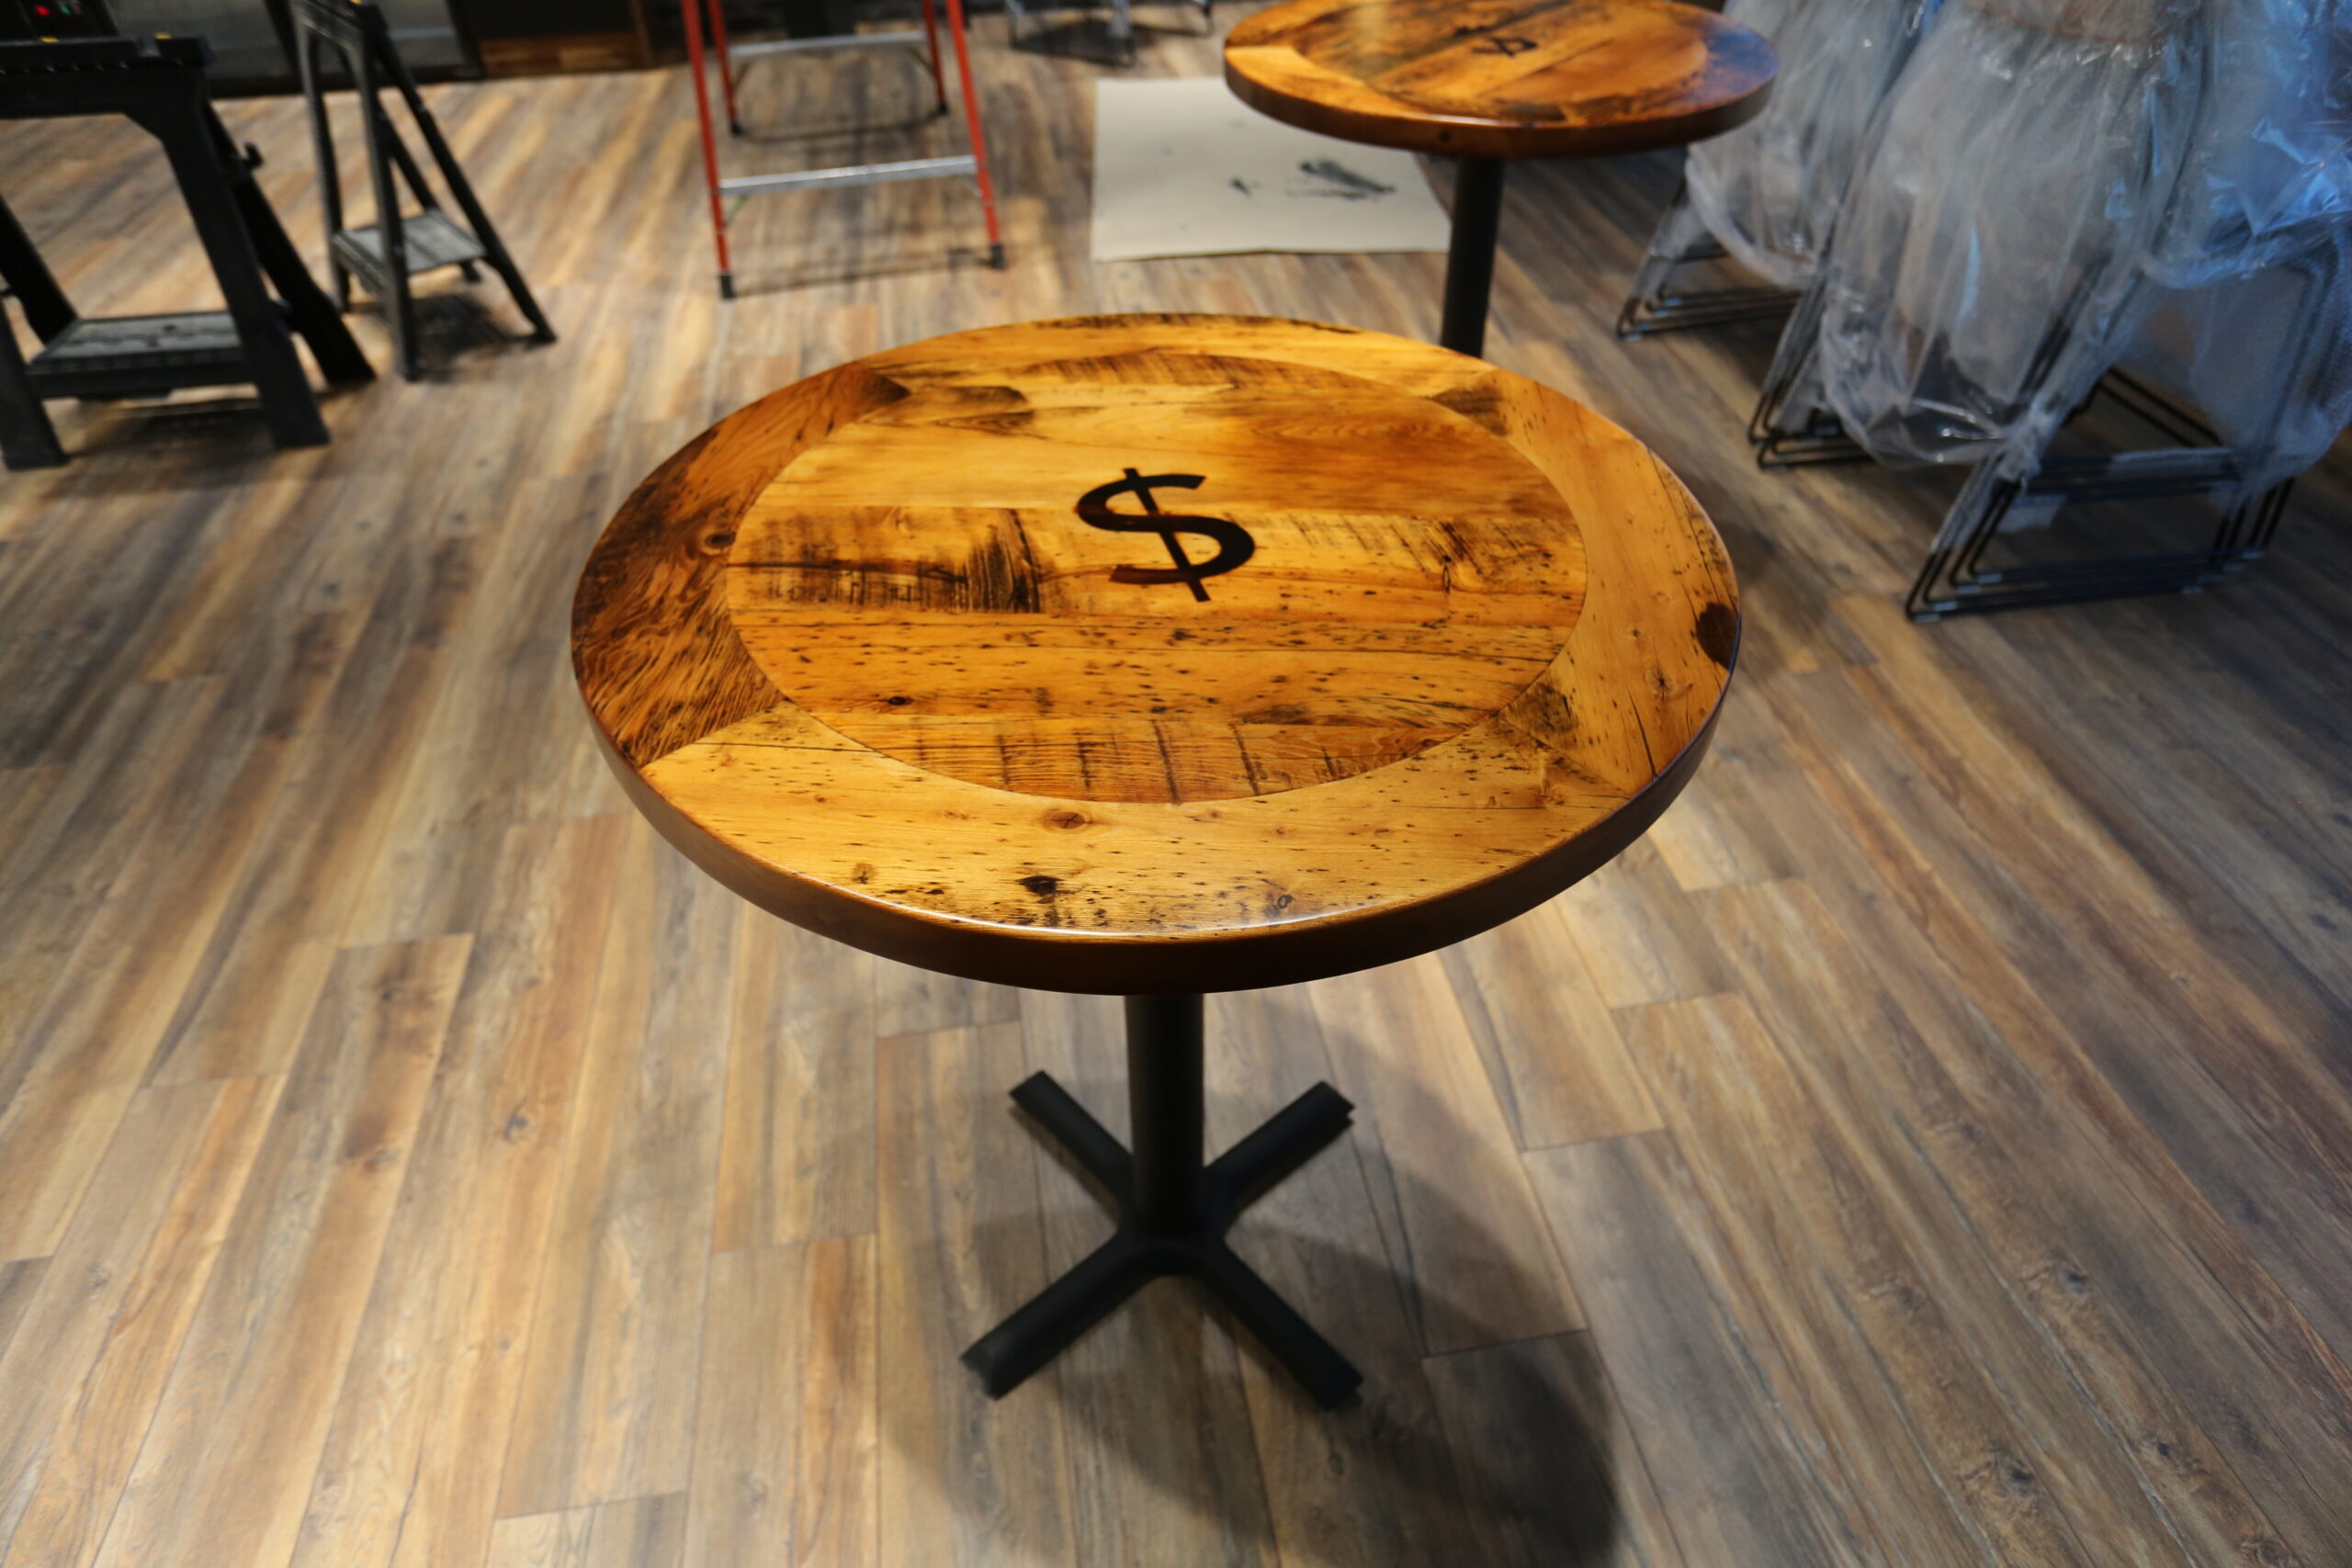 [Ontario Barnwood] Event Tables we made for a Burlington, Ontario Business â€“ Matte Black Metal Bases [provided by Ontario Table & Chair in Waterloo] â€“ Custom branding iron [provide by Summit Laser in Salem] - 2â€ Old Growth Reclaimed Hemlock Threshing Floor Construction Tops â€“ Original distressing & character maintained - Premium epoxy + satin polyurethane finish â€“ www.table.ca